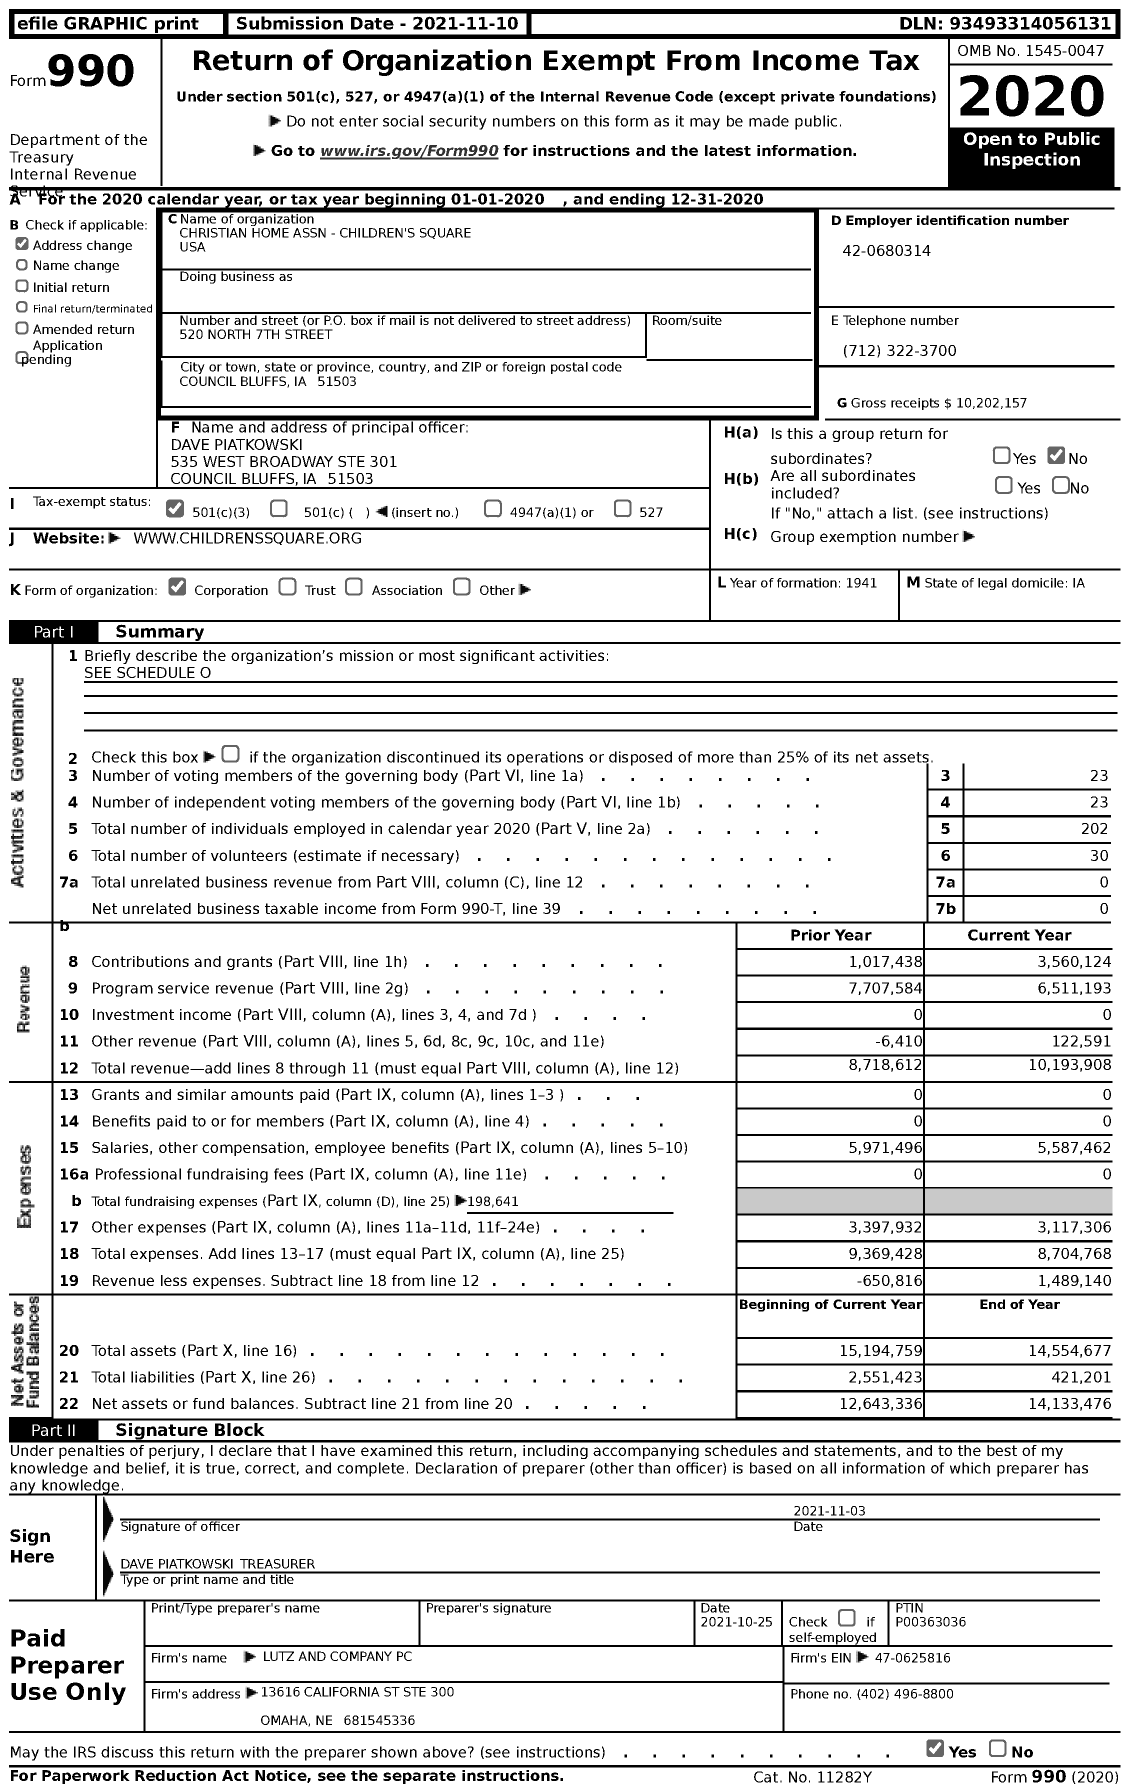 Image of first page of 2020 Form 990 for Christian Home Association - Children's Square USA